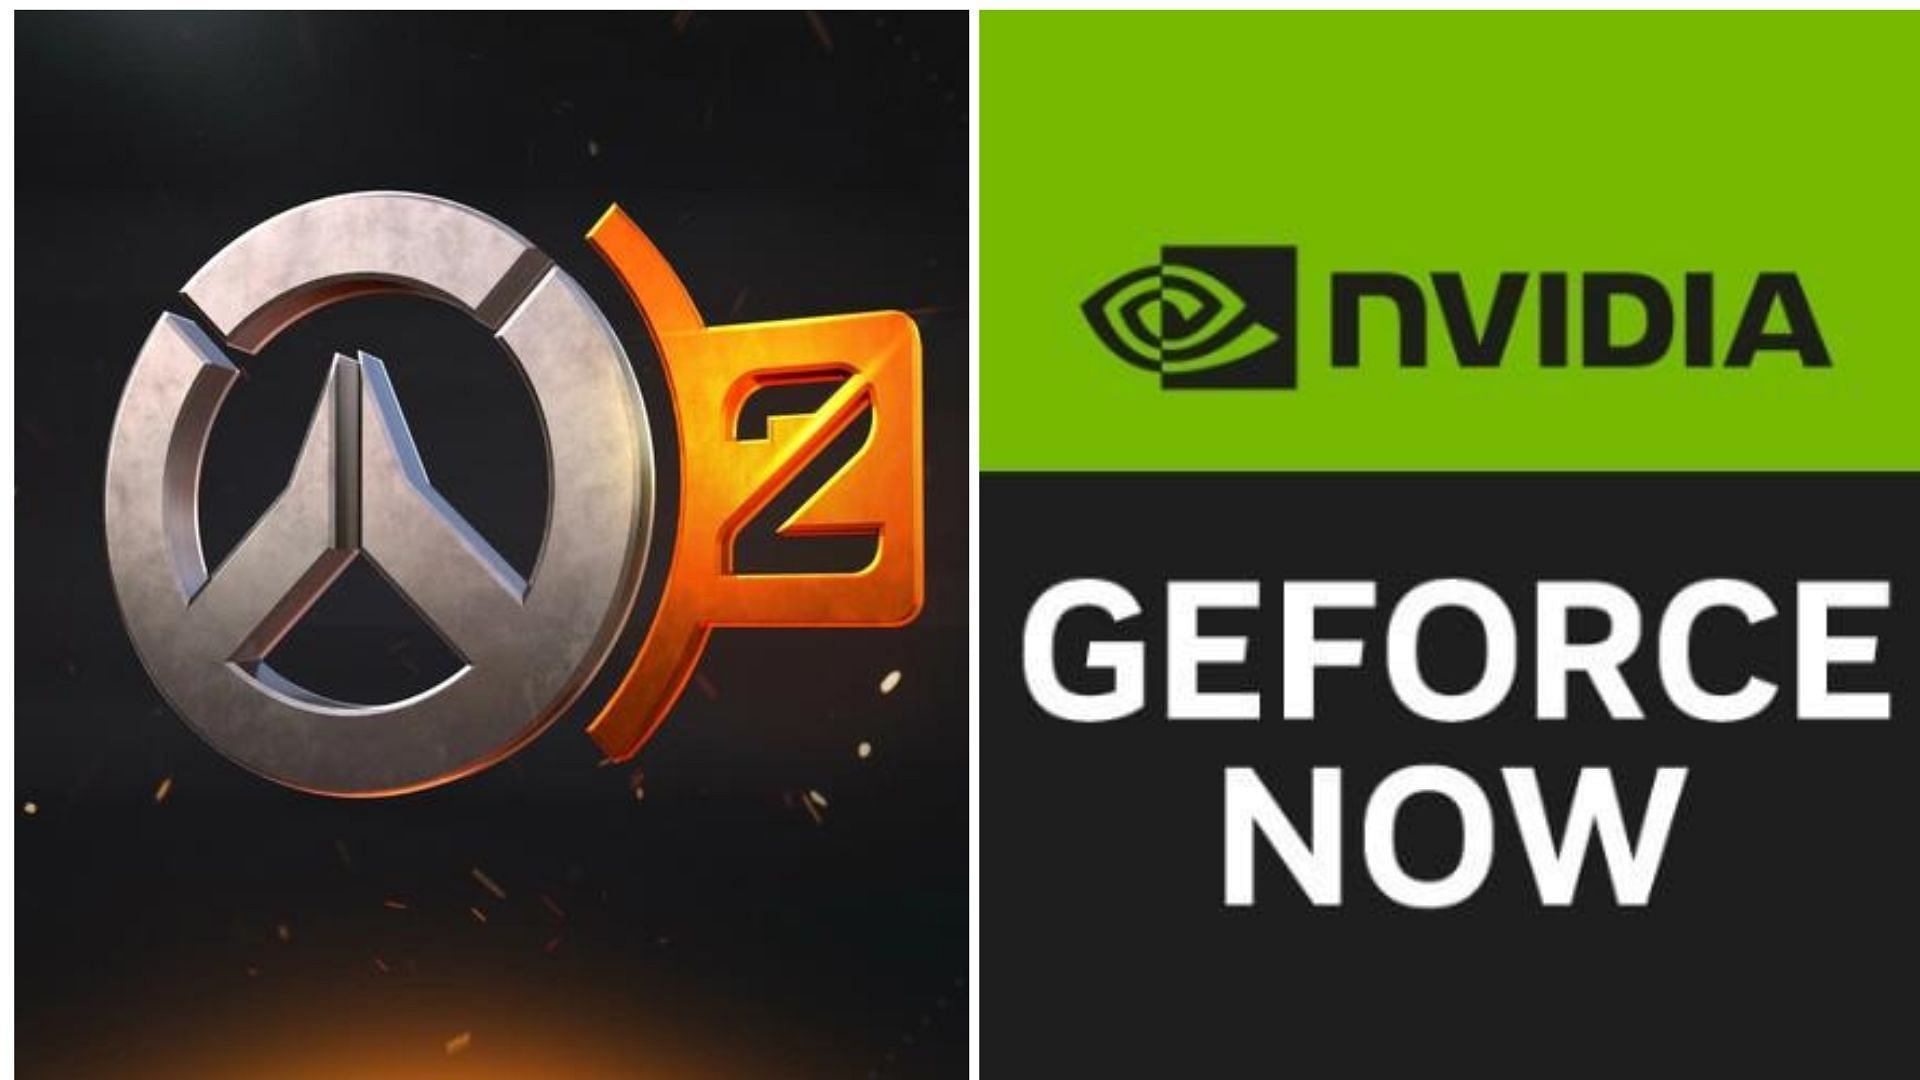 Overwatch 2 is all set to make its entry into the Geforce NOW cloud gaming world (Image via Blizzard and Nvidia) 